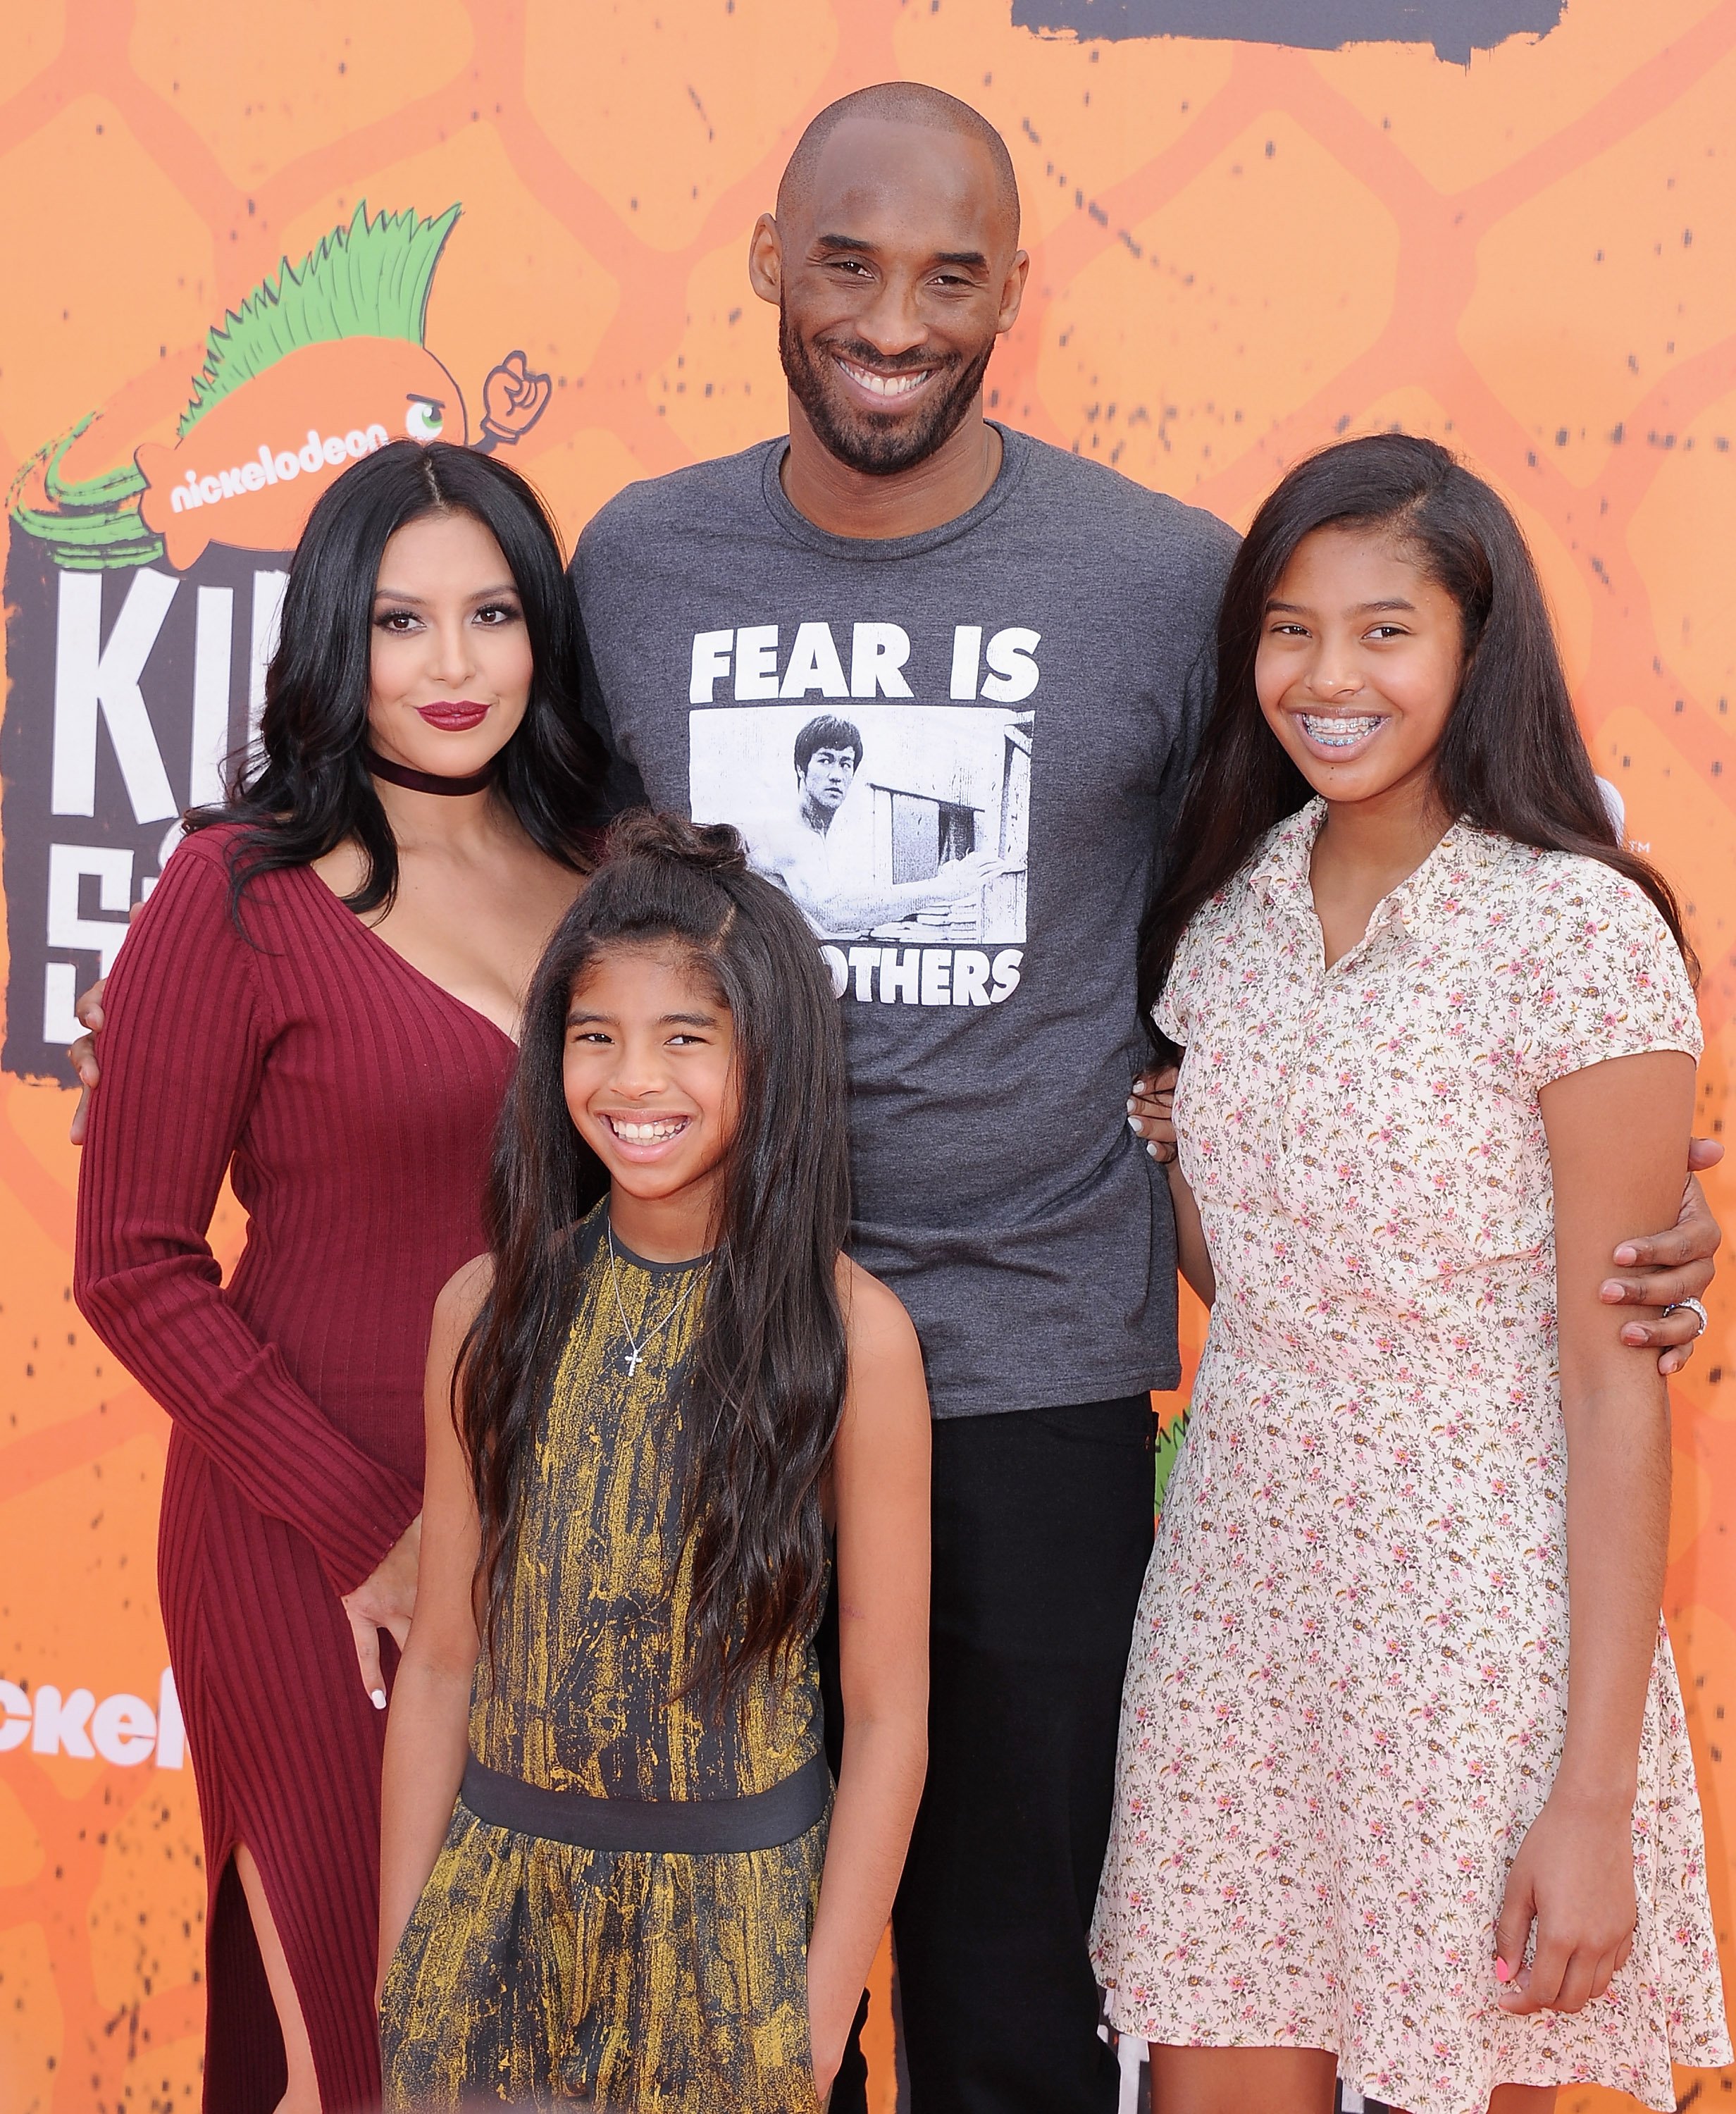  Kobe Bryant and his wife, Vanessa, along with their daughters, Gianna and Natalia, at Nickelodeon Kids' Choice Sports Awards on July 14, 2016. | Photo: Getty Images